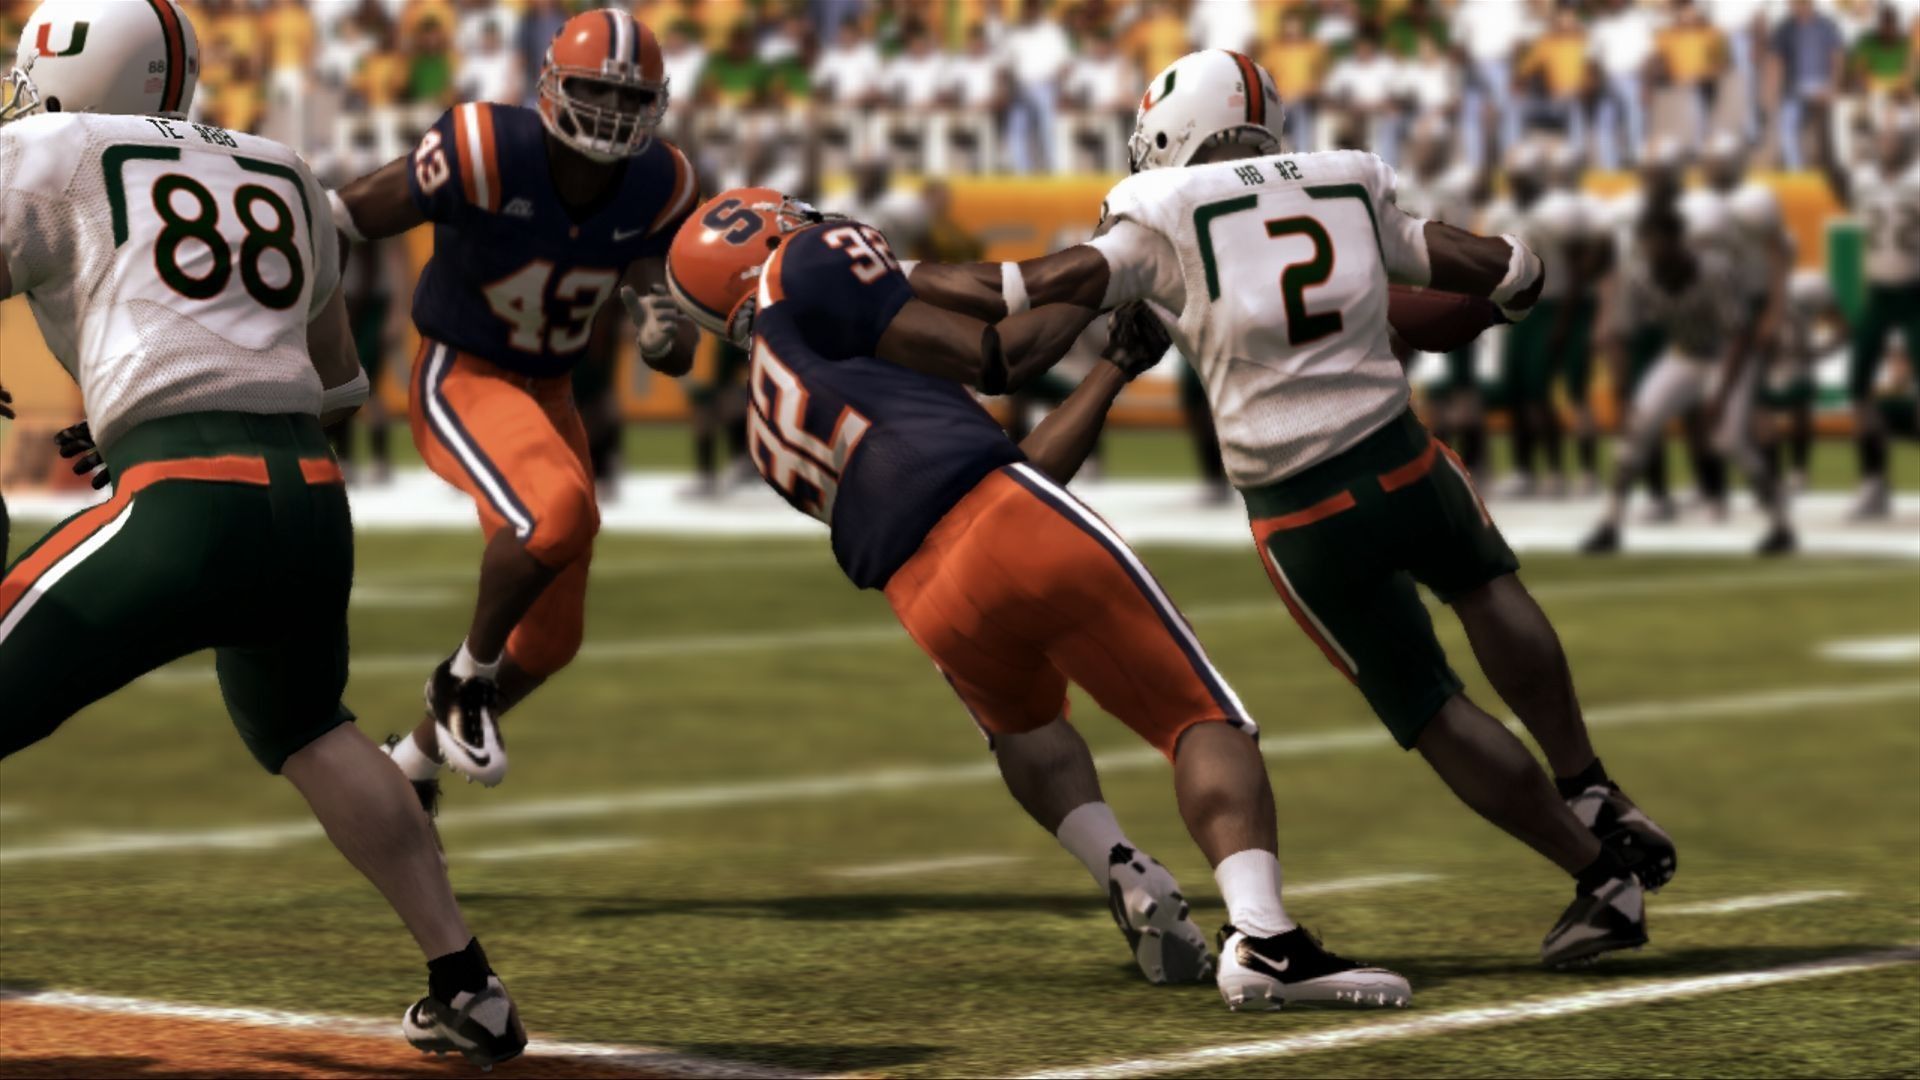 9 11 game. NCAA Football. NCAA Football 11. NCAA game. Football 11 game.